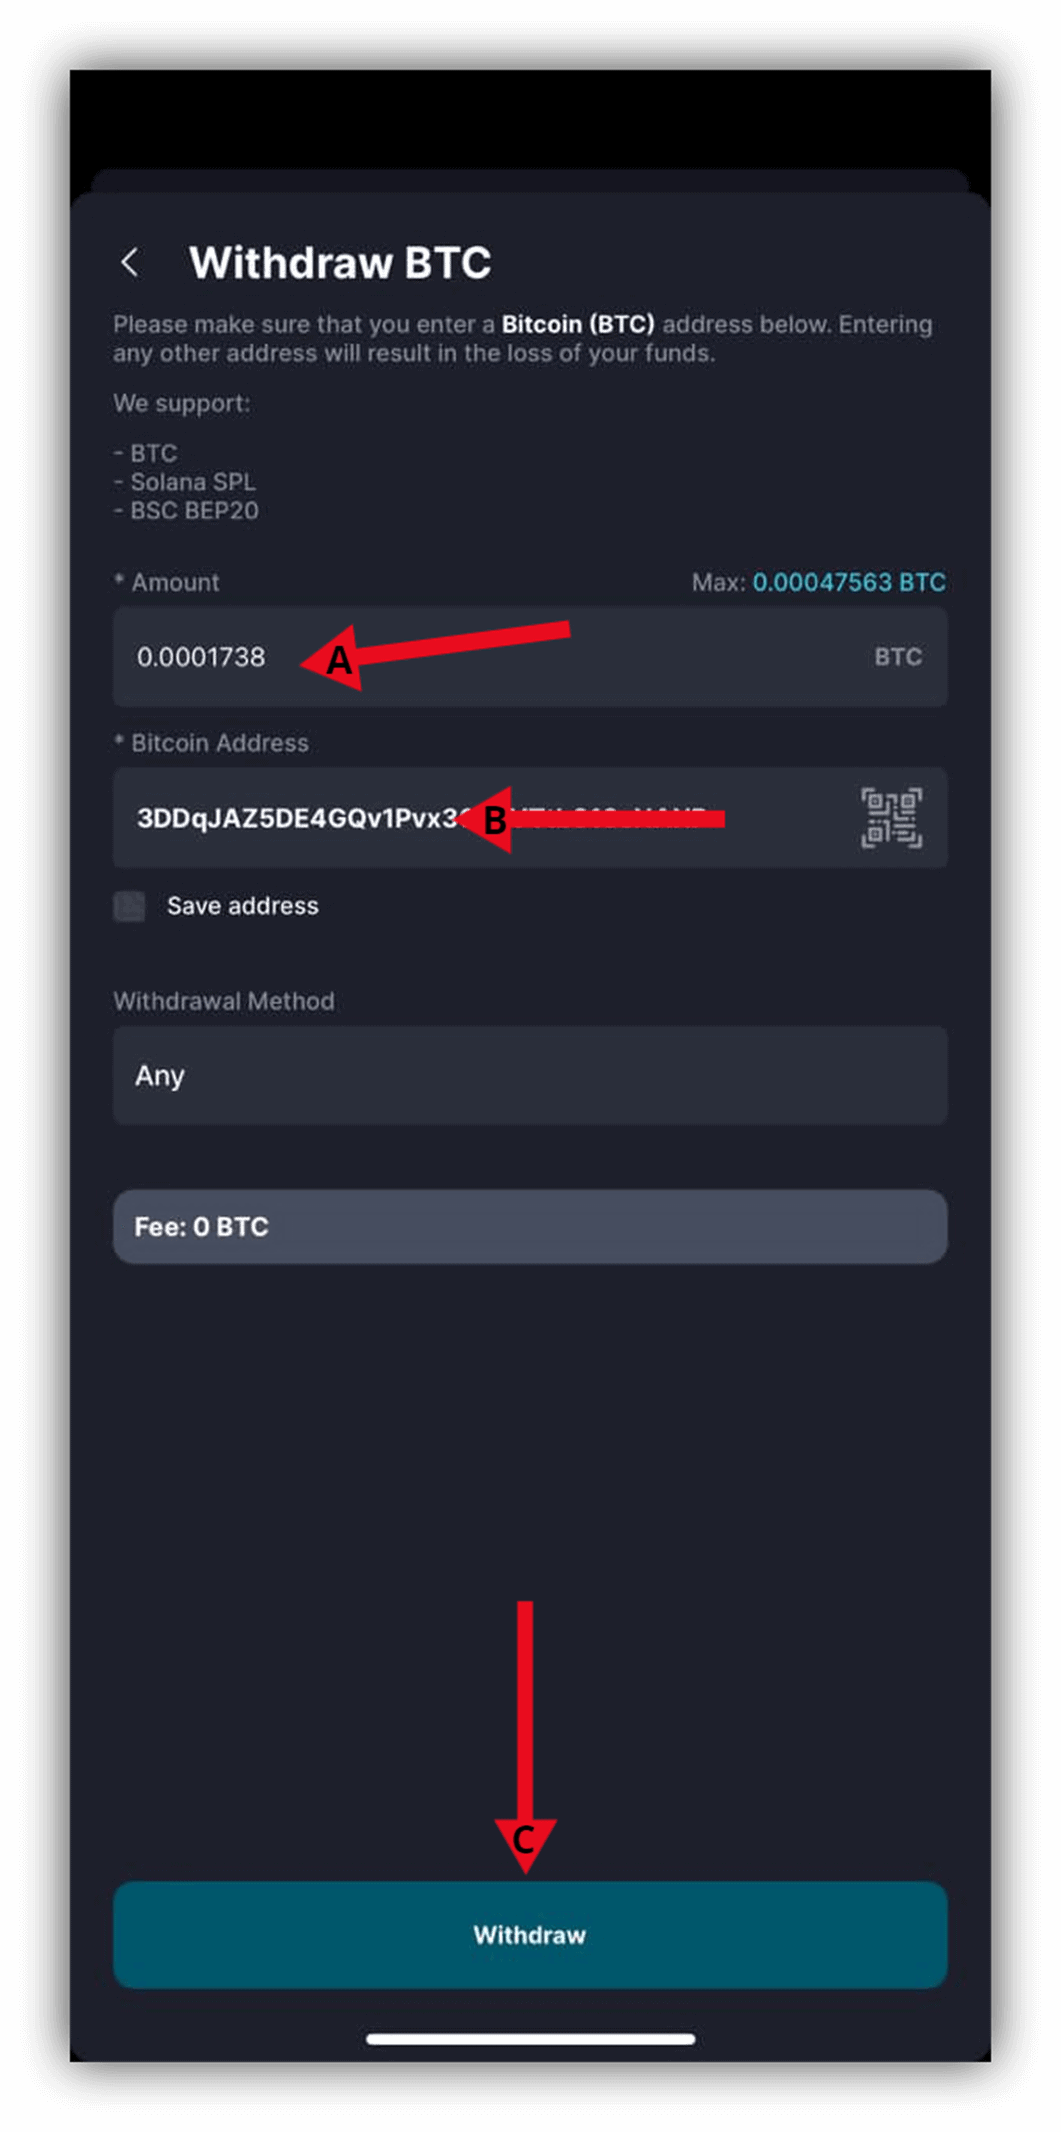 FTX US to BTCC 8 - How to transfer crypto from FTX US to BTCC